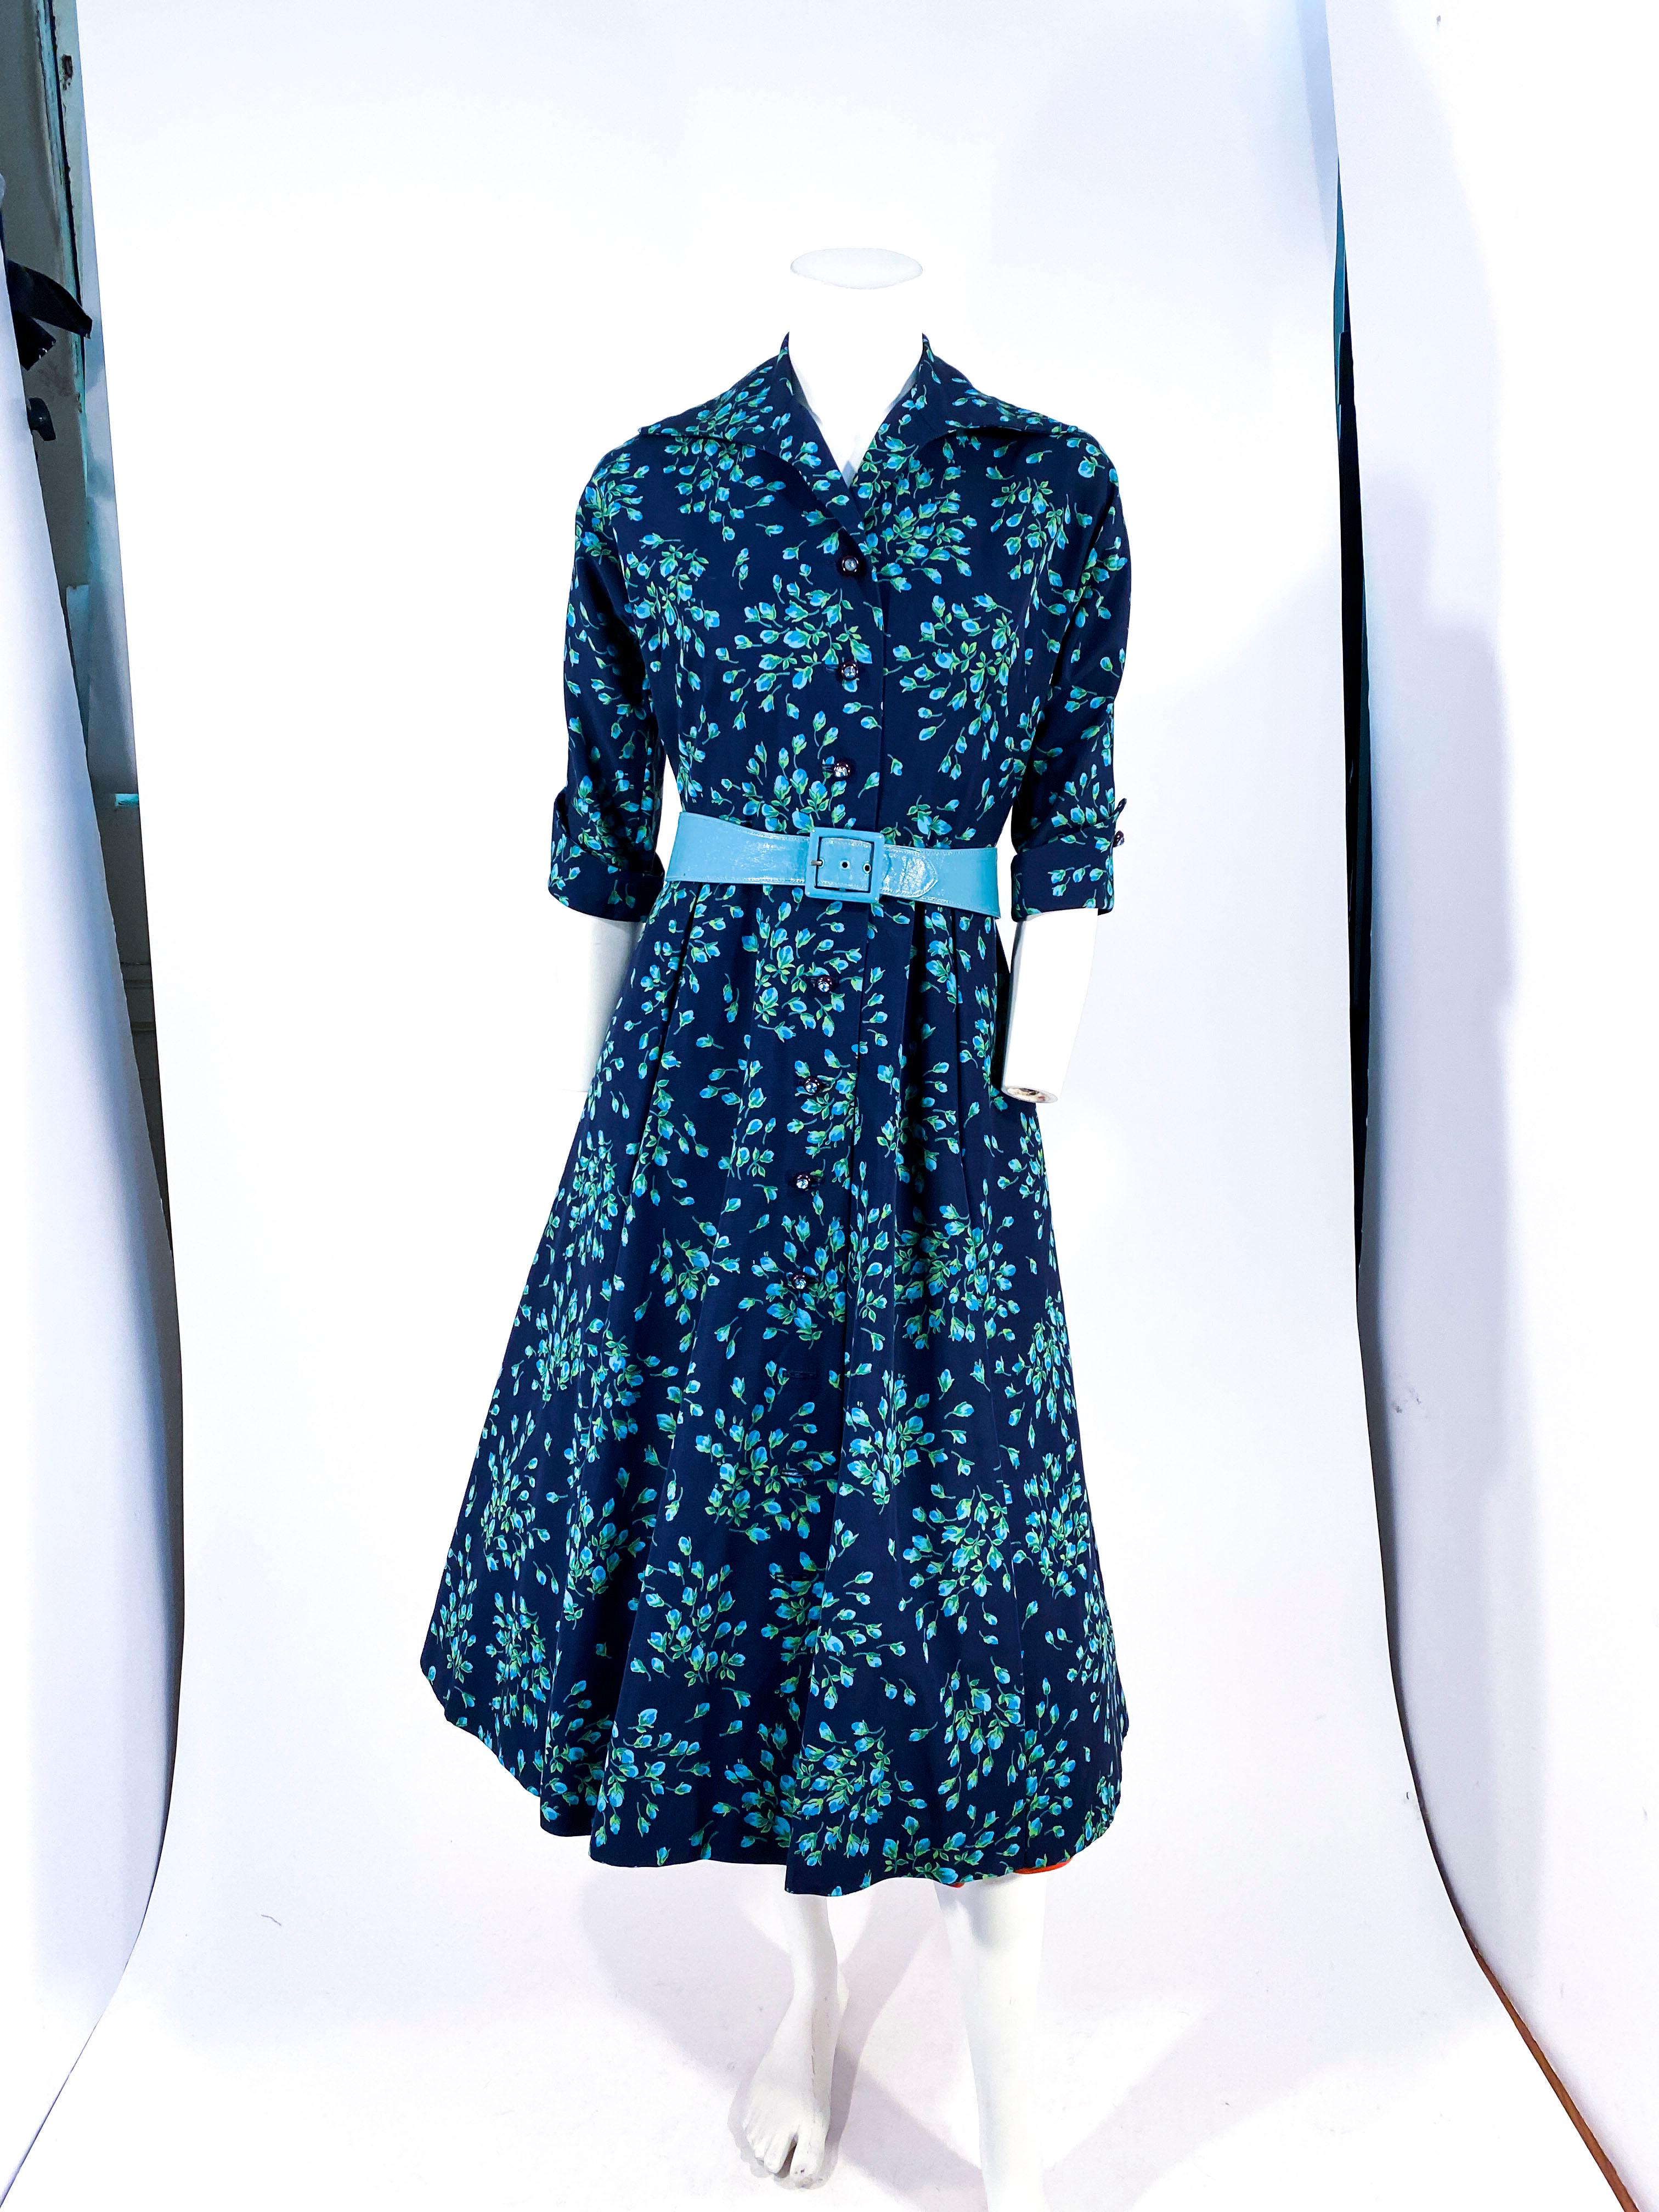 1950s Navy Blue floral printed rayon twill custom made day dress with inteiro taffeta & tulle petticoat. The Face oth edress is decorated with large rhinestoned centered buttons, an enlarged pointed collar, elbow-length sleeves that cuff and are